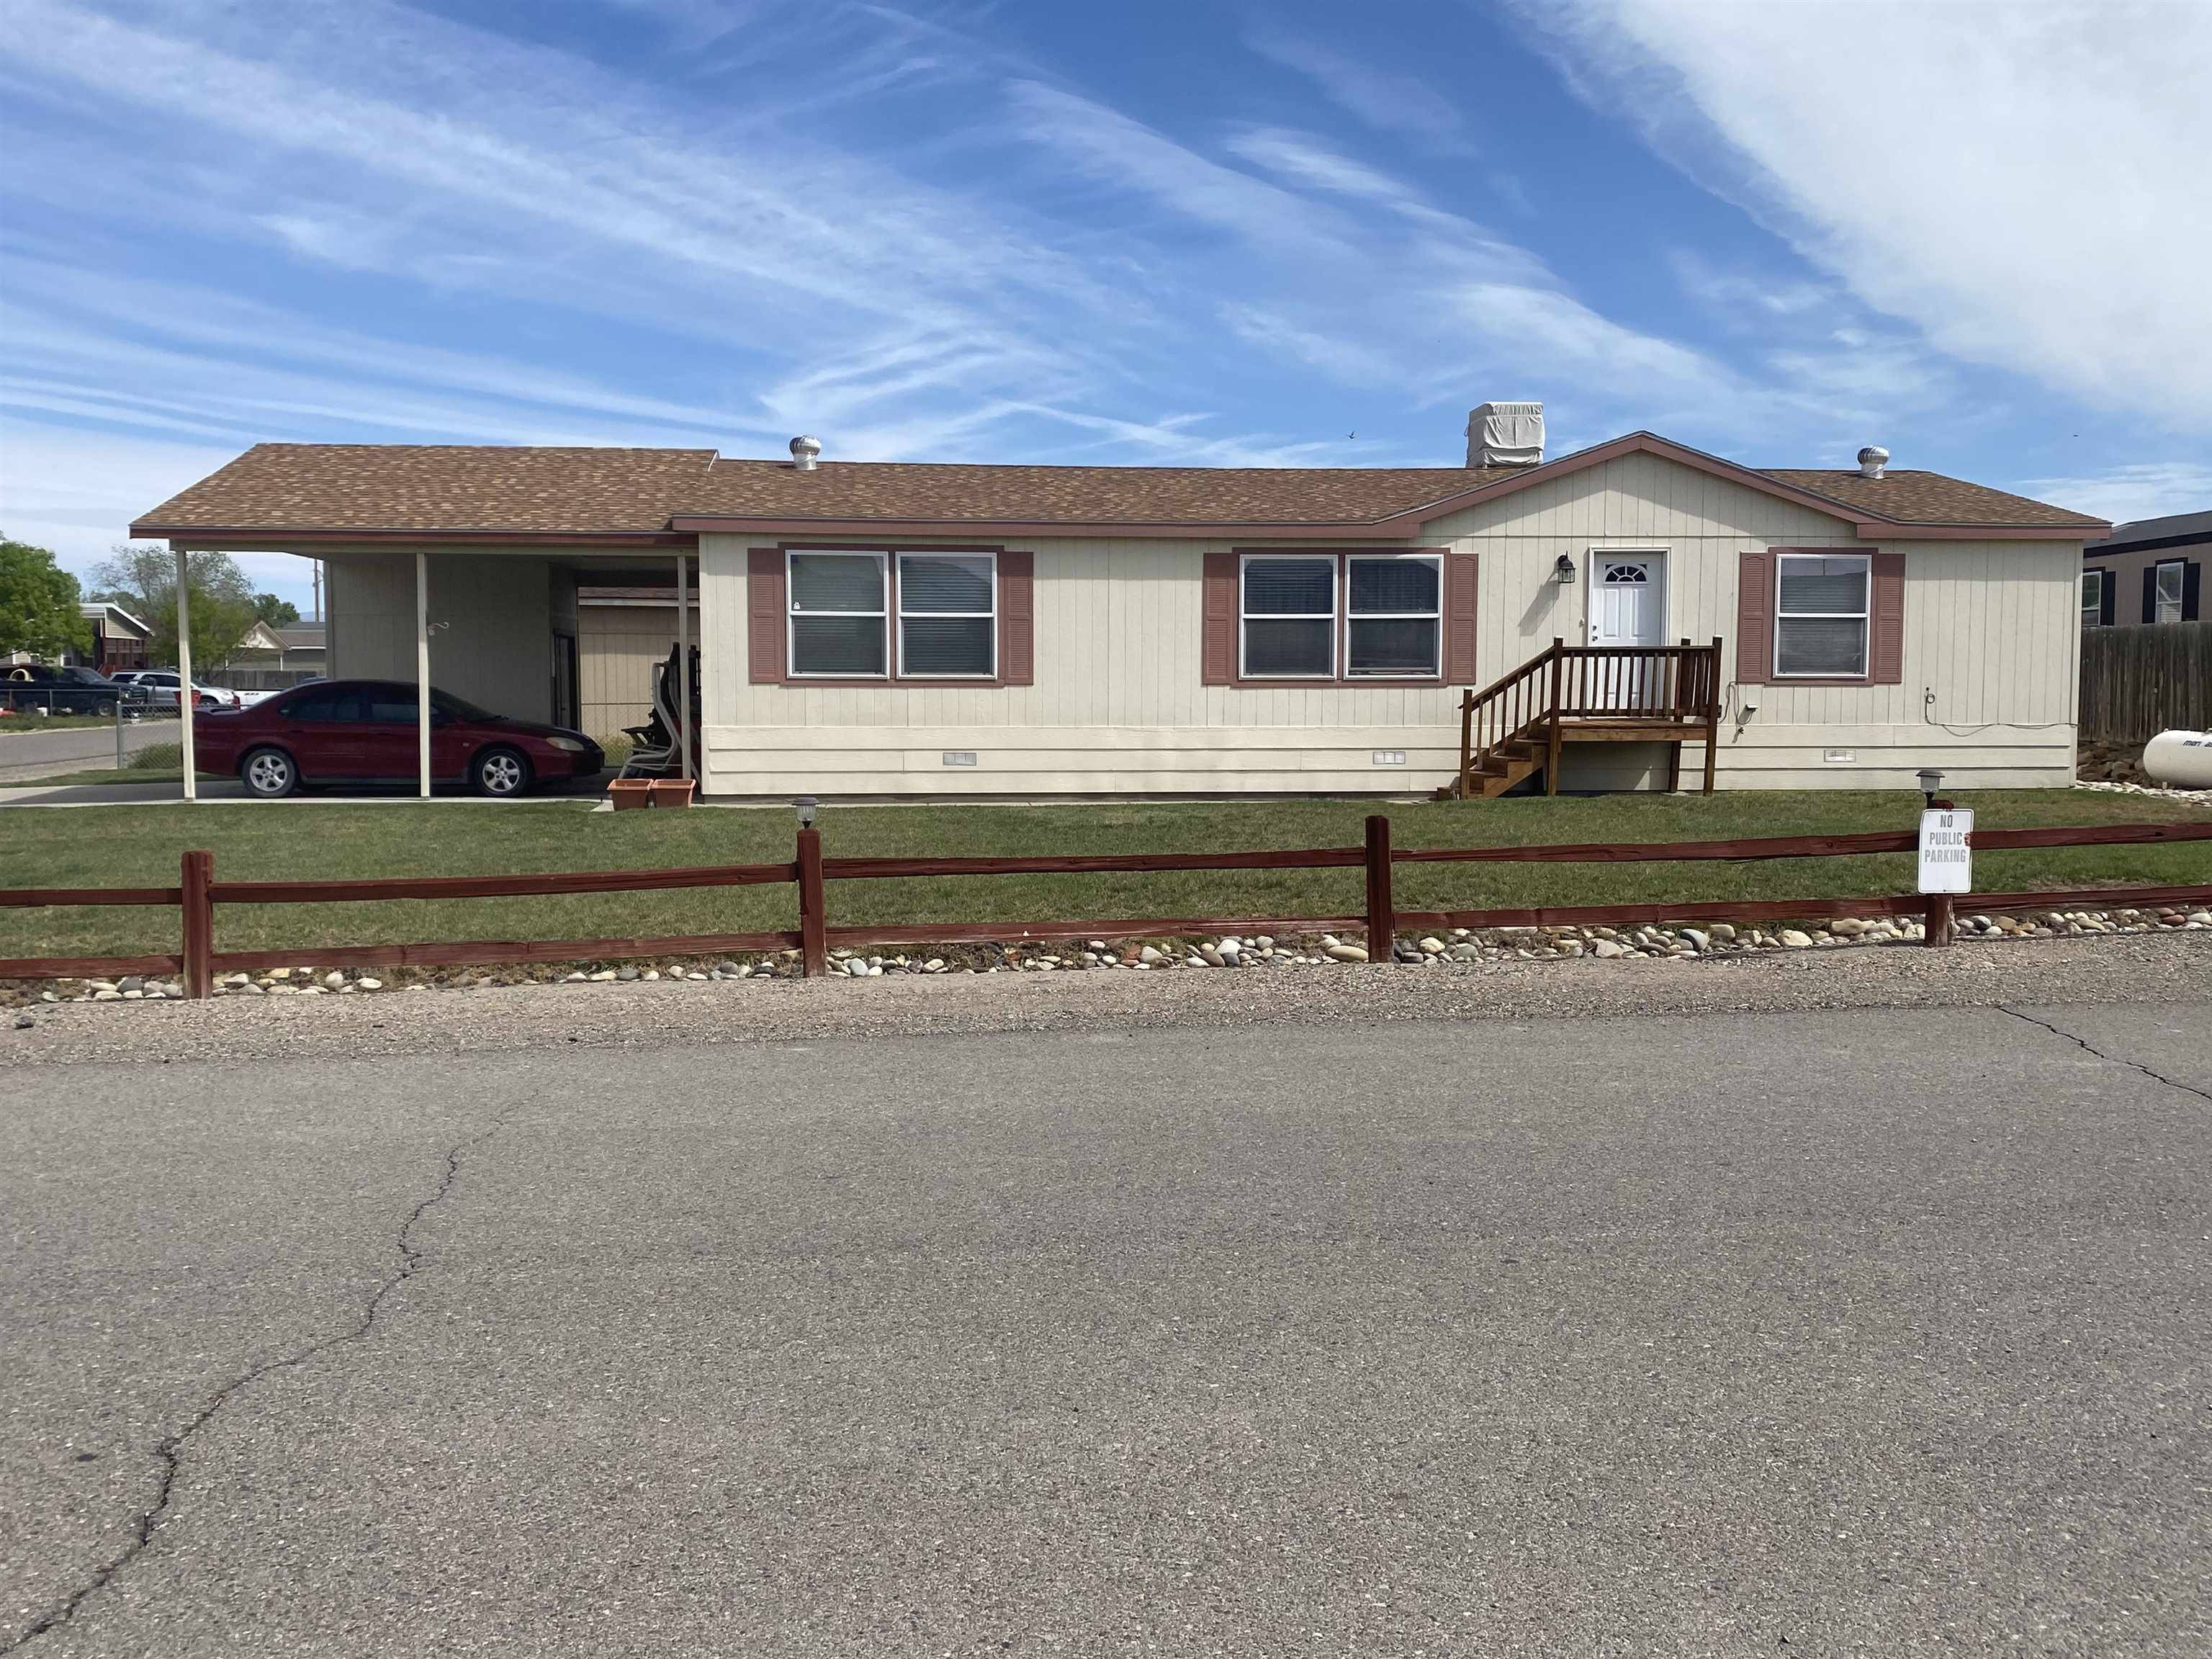 Spacious home on a corner lot in a country setting with views of the Colorado National Monument.  Summit Crest constructed manufactured home with extra insulation and higher quality construction. Great community setting that includes a park and a salt water pool!  Schedule a showing today and experience the peace and quiet the country has to offer.